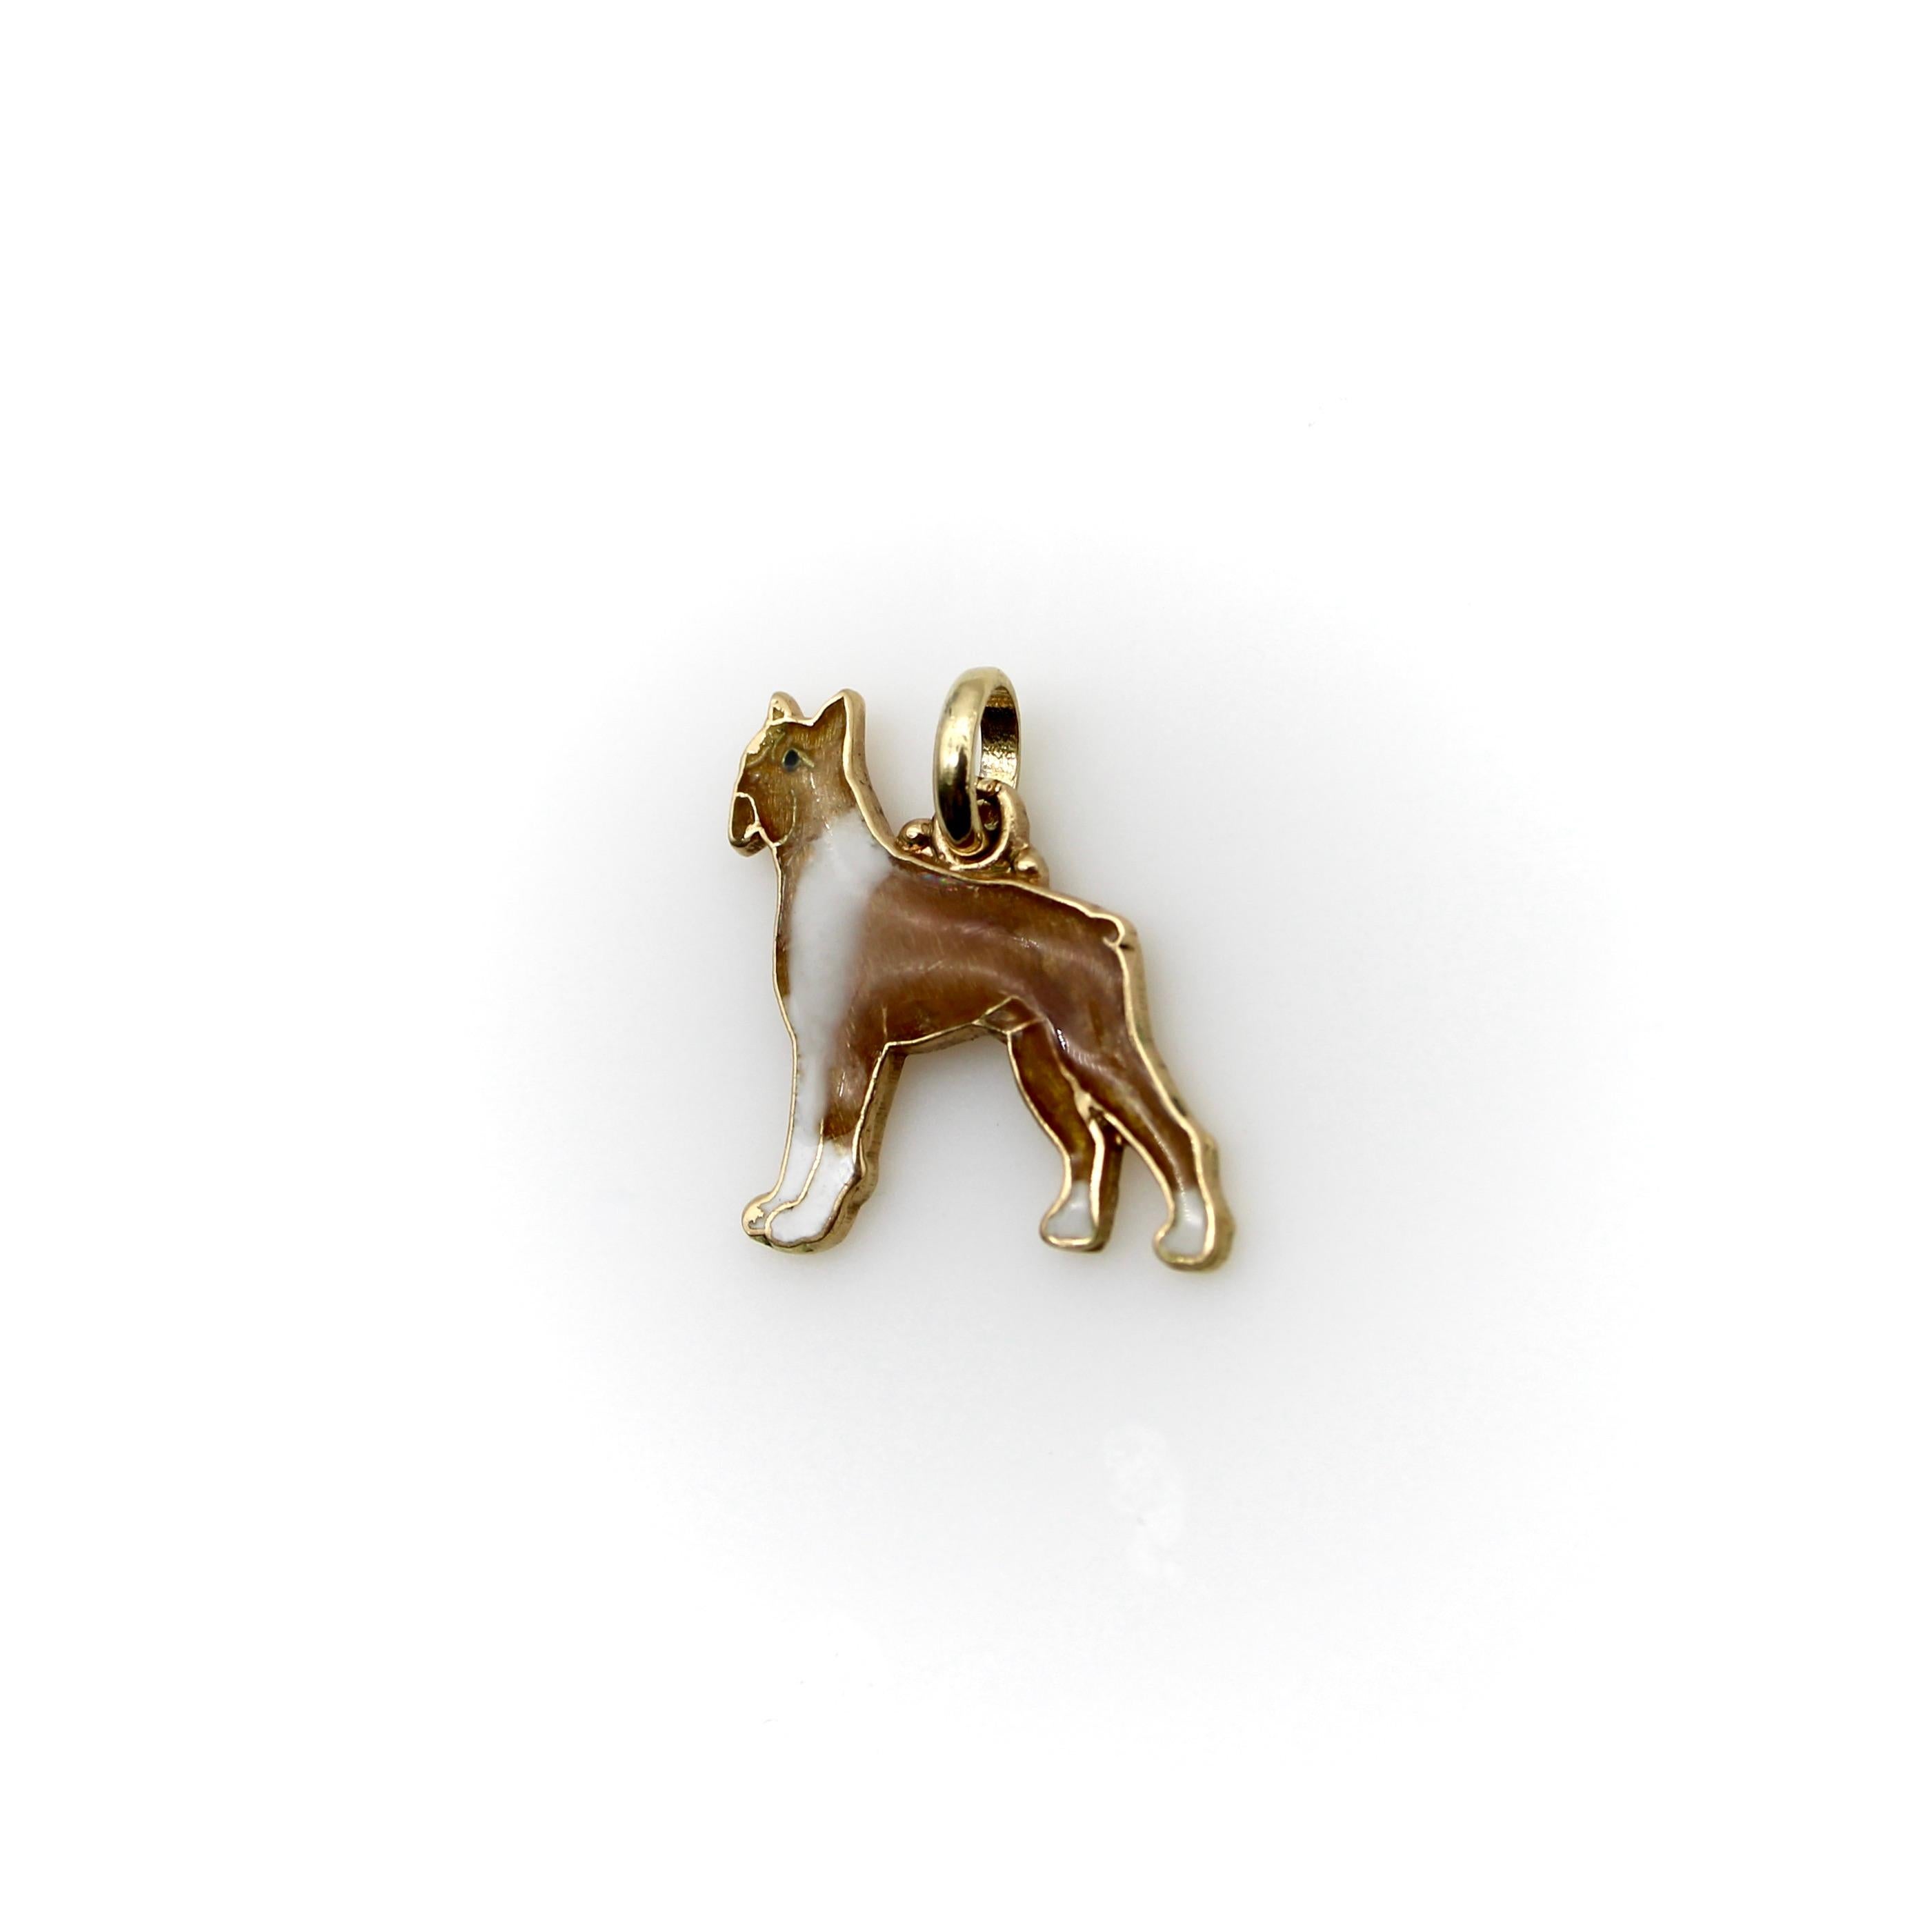 Made in 14k gold with enamel details, the dog in this charm is a boxer with a tan body and white chest and paws. In the 1950’s, the boxer was the most popular dog in America, and this proud little dog is a great representation of the breed. Each